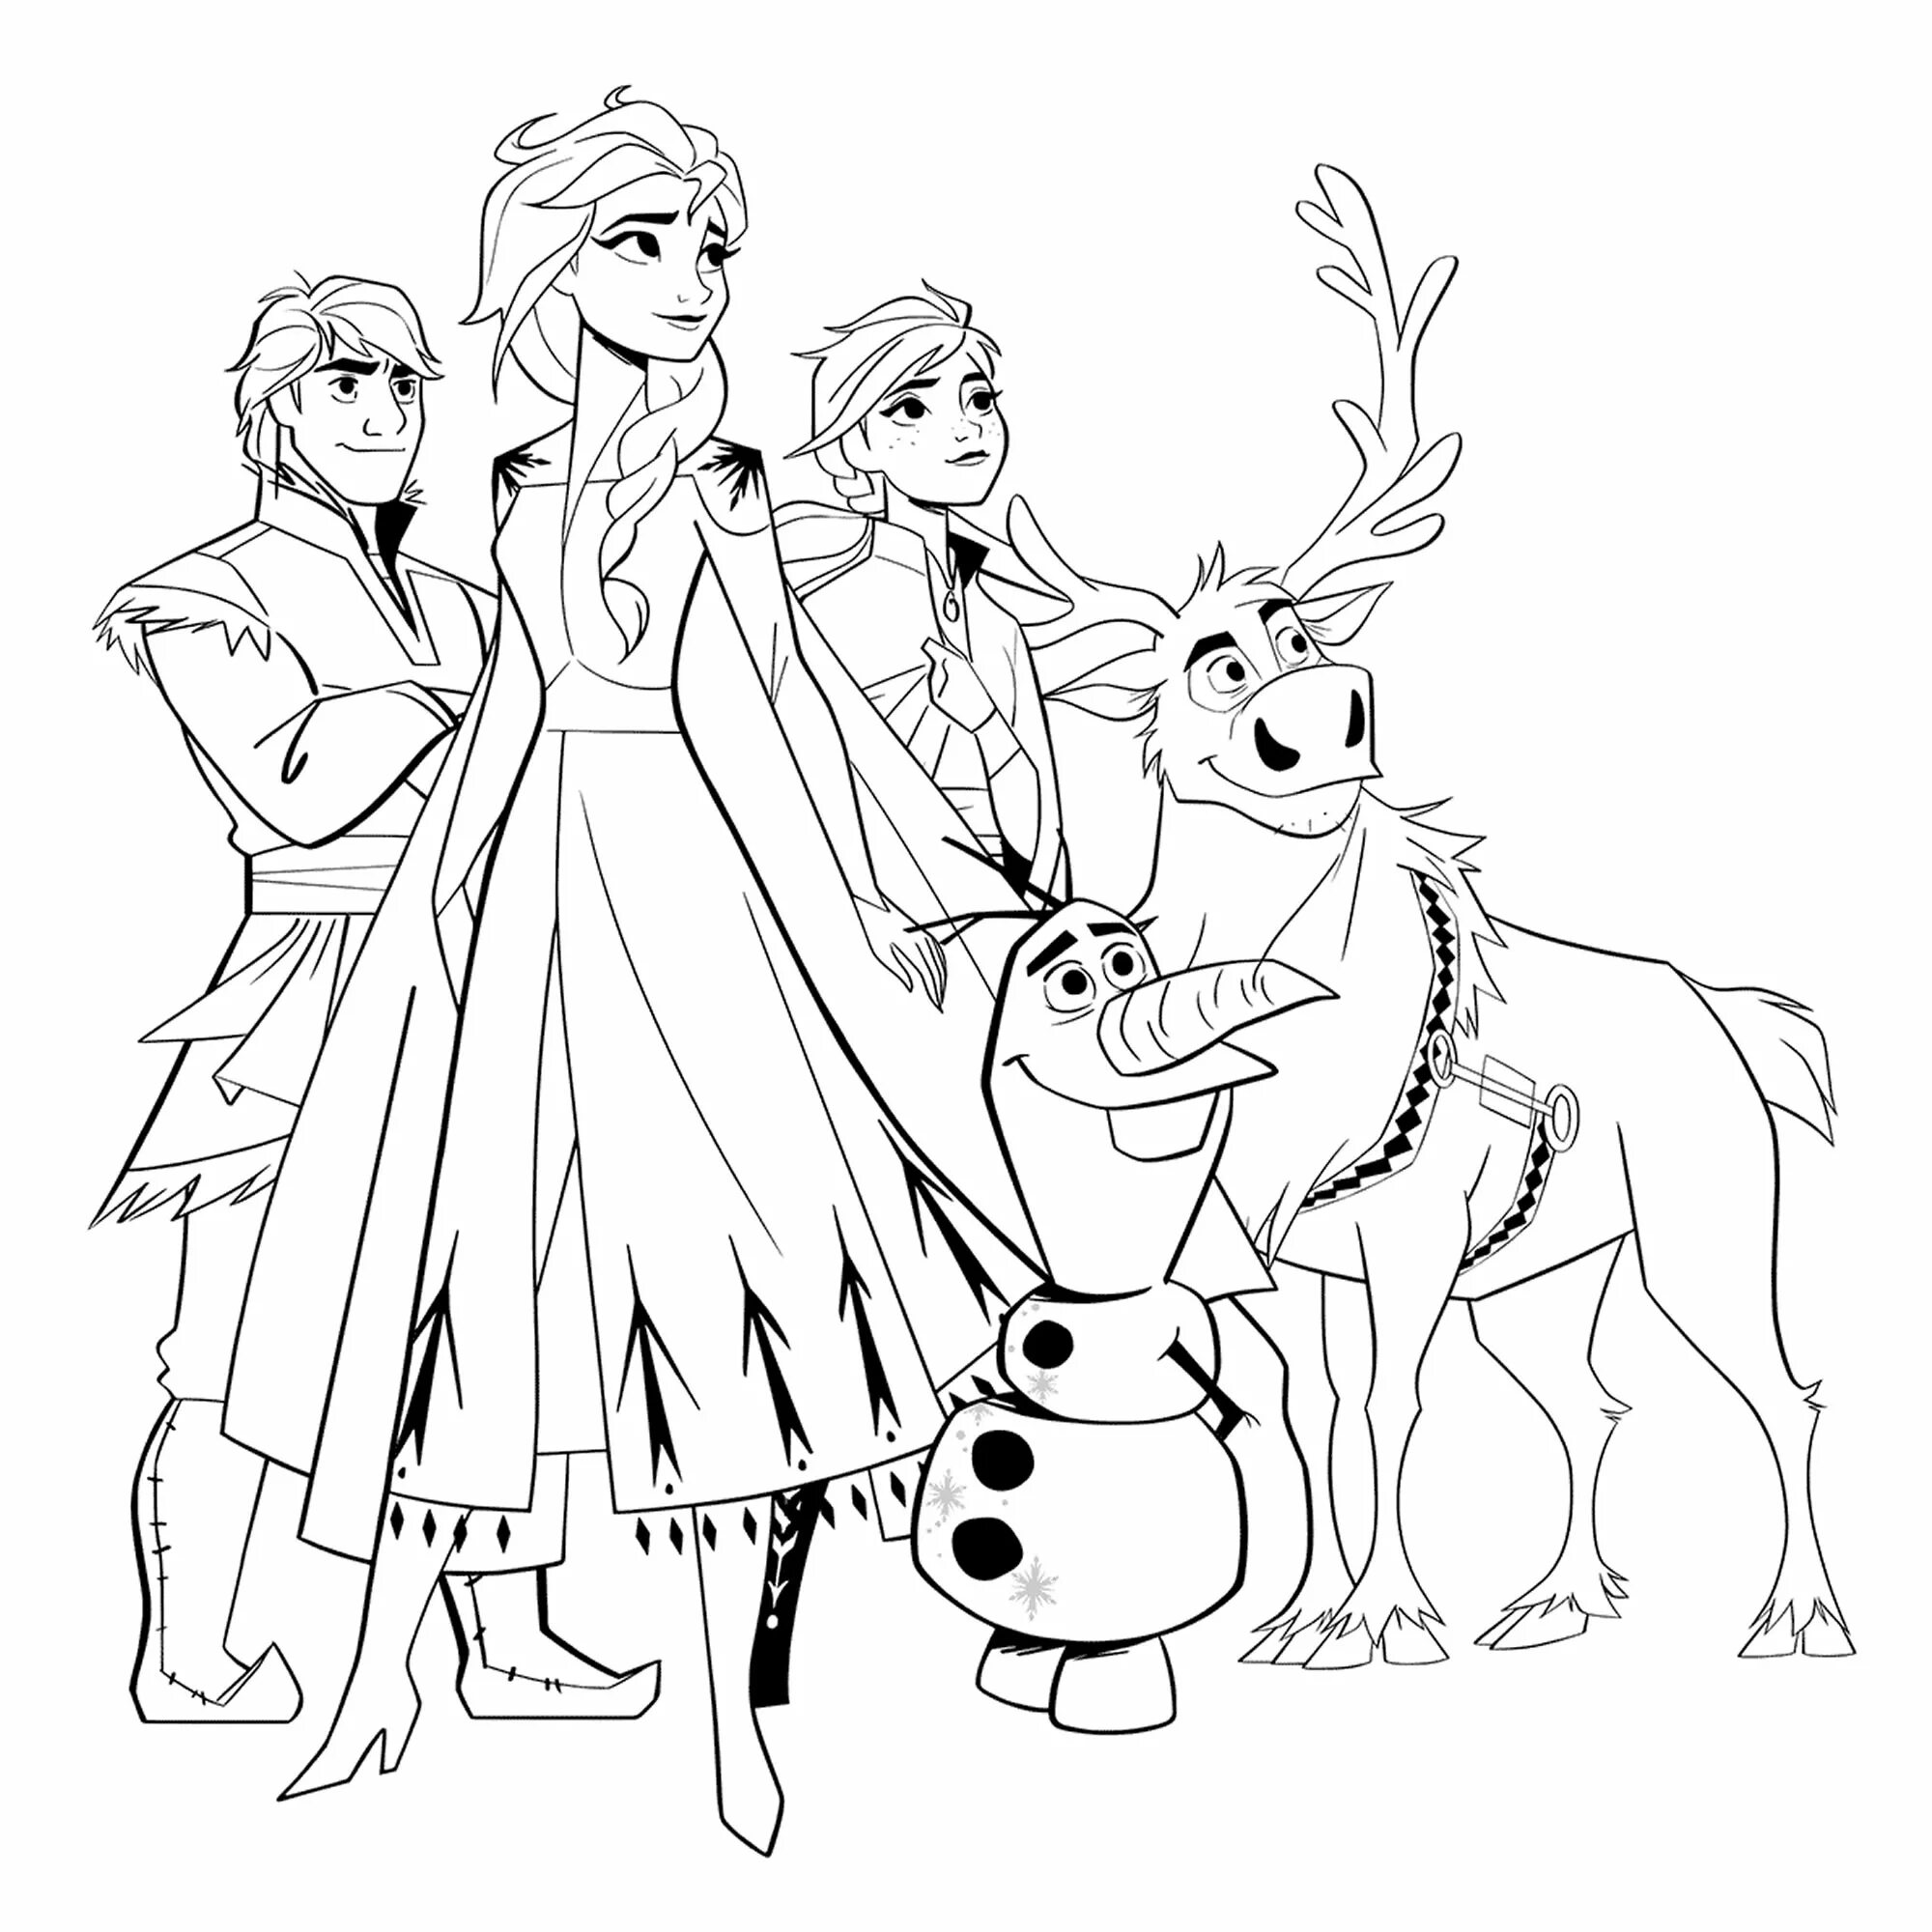 Frozen coloring page #4